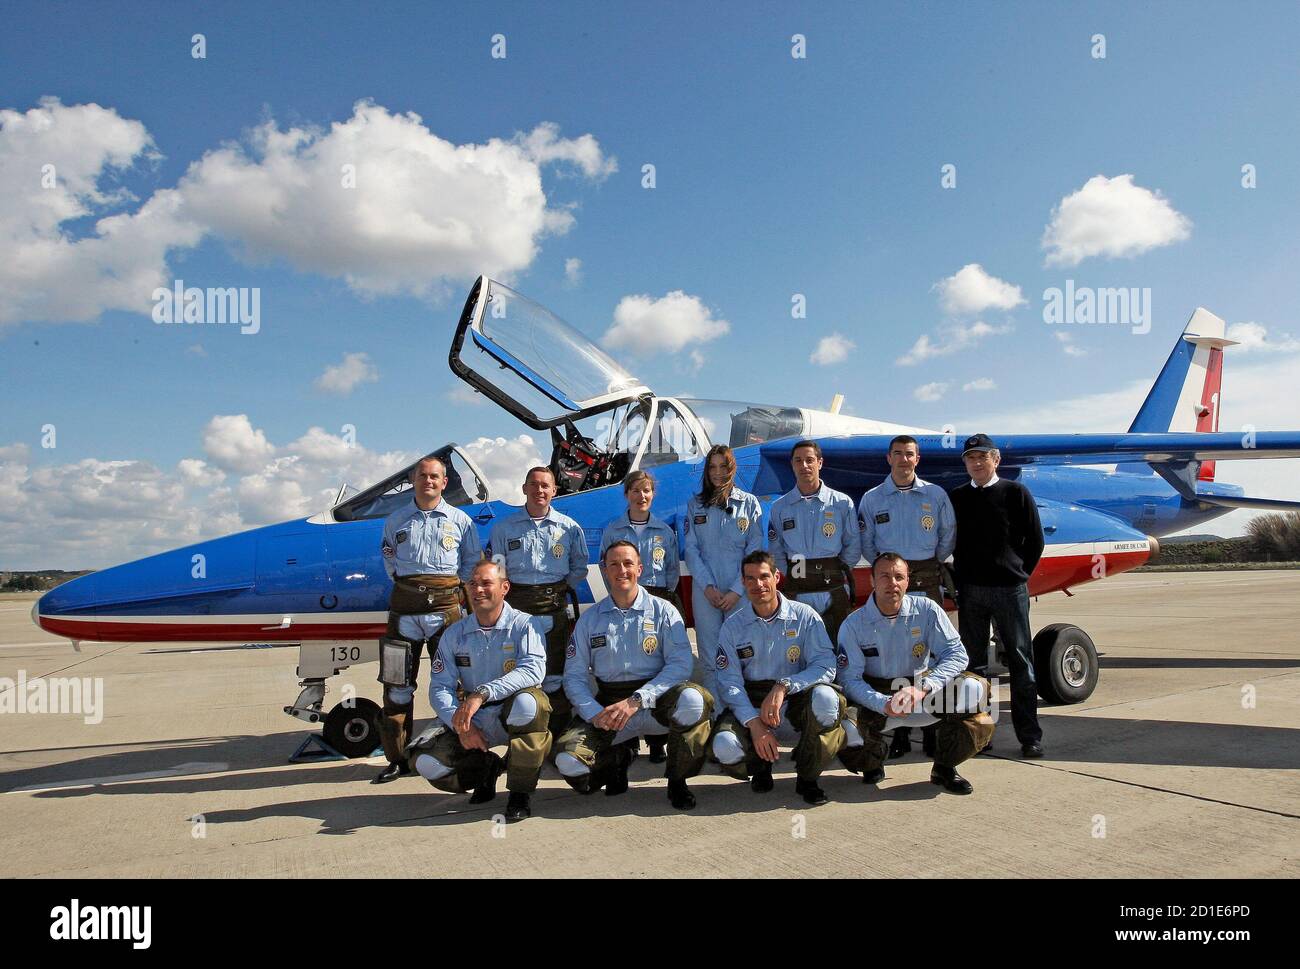 France's first lady Carla Bruni-Sarkozy (C), patron of the French aerobatic  squadron "Patrouille de France" poses with pilots after an exhibition in  Salon, April 2, 2010. REUTERS/Jean-Paul Pelissier (FRANCE - Tags: MILITARY